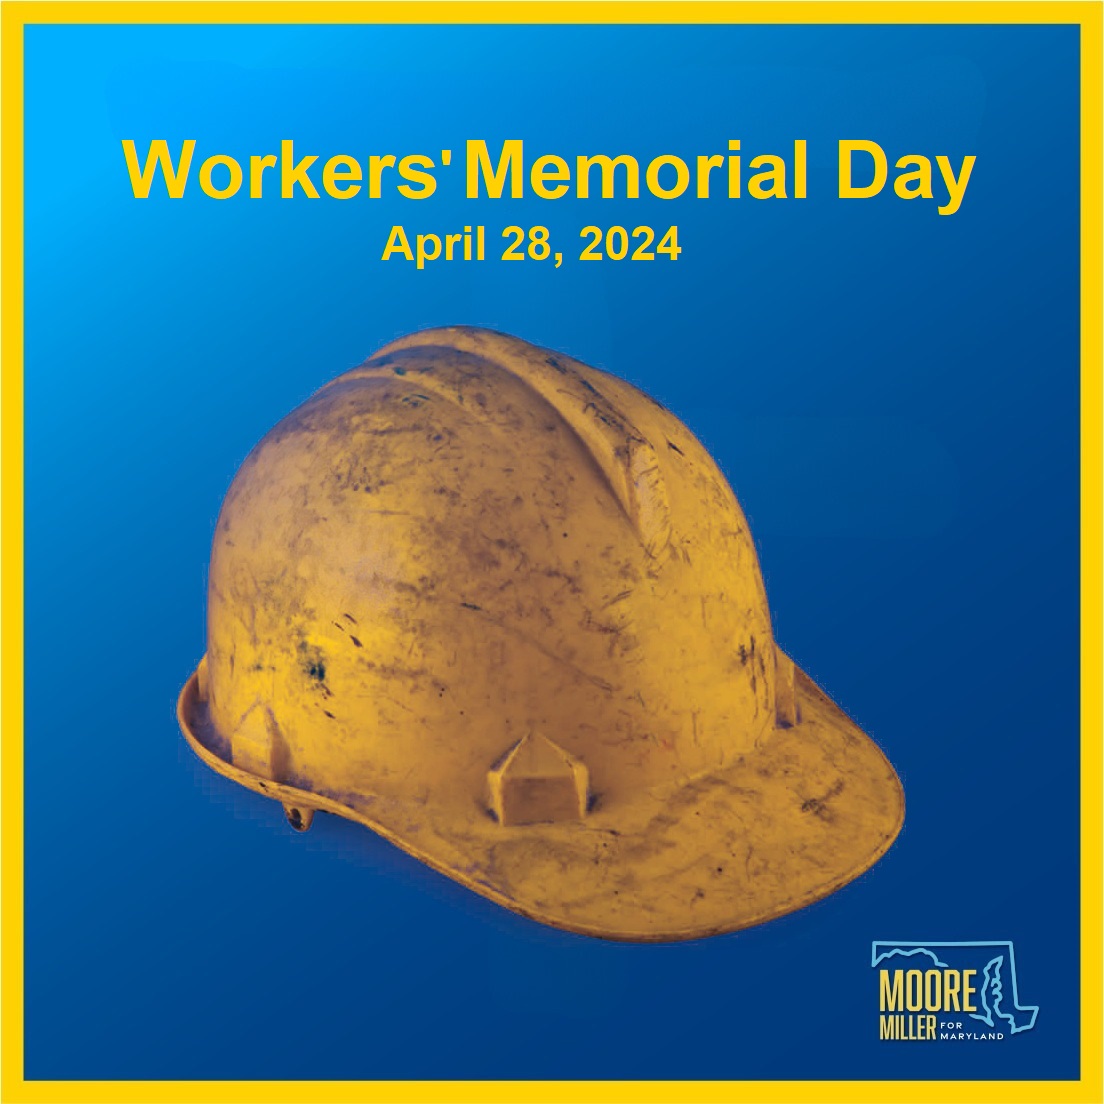 On #WorkersMemorialDay, let us honor workers who have lost their lives, suffered injuries, or endured illnesses due to their work. Let this day serve as a reminder of the importance of workplace safety and health to prevent future tragedies.